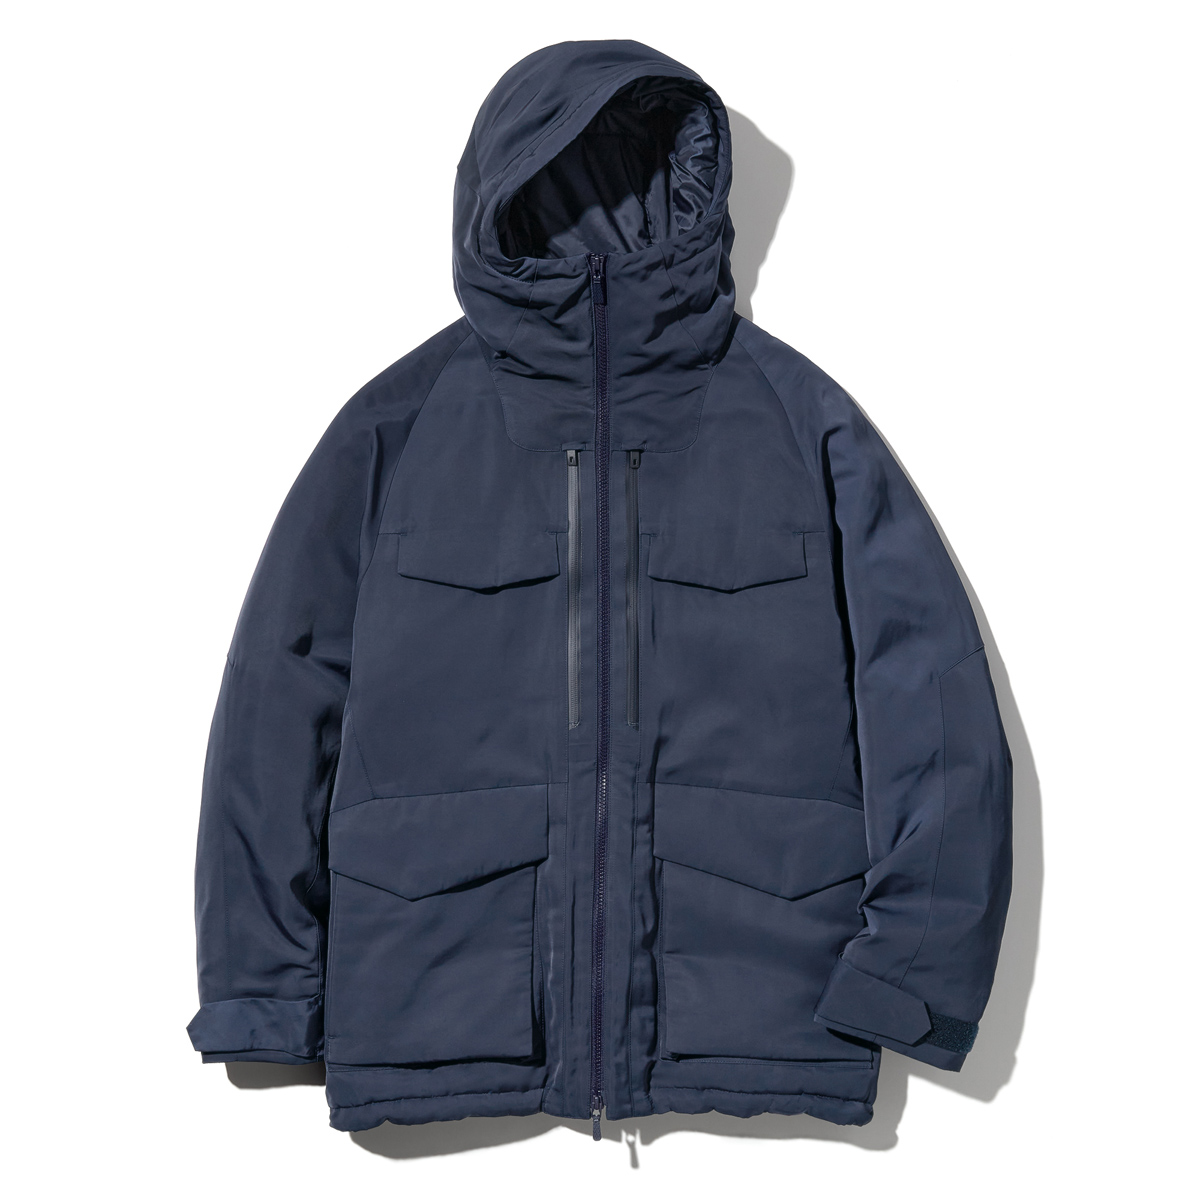 White Mountaineering x UNIQLO Fall/Winter 2021 Collection